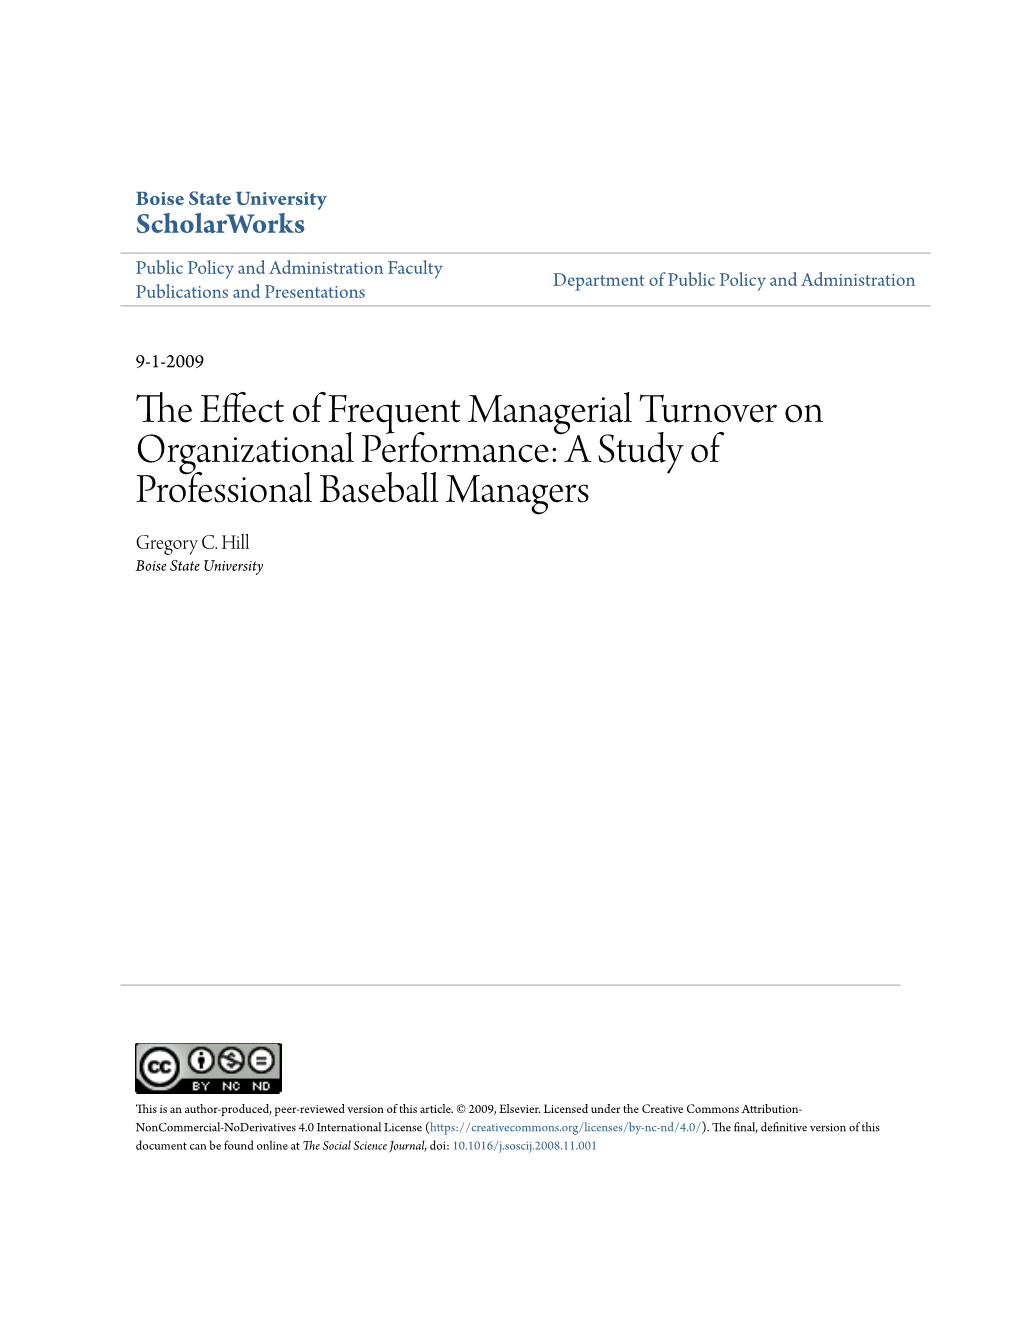 The Effect of Frequent Managerial Turnover on Organizational Performance: a Study of Professional Baseball Managers